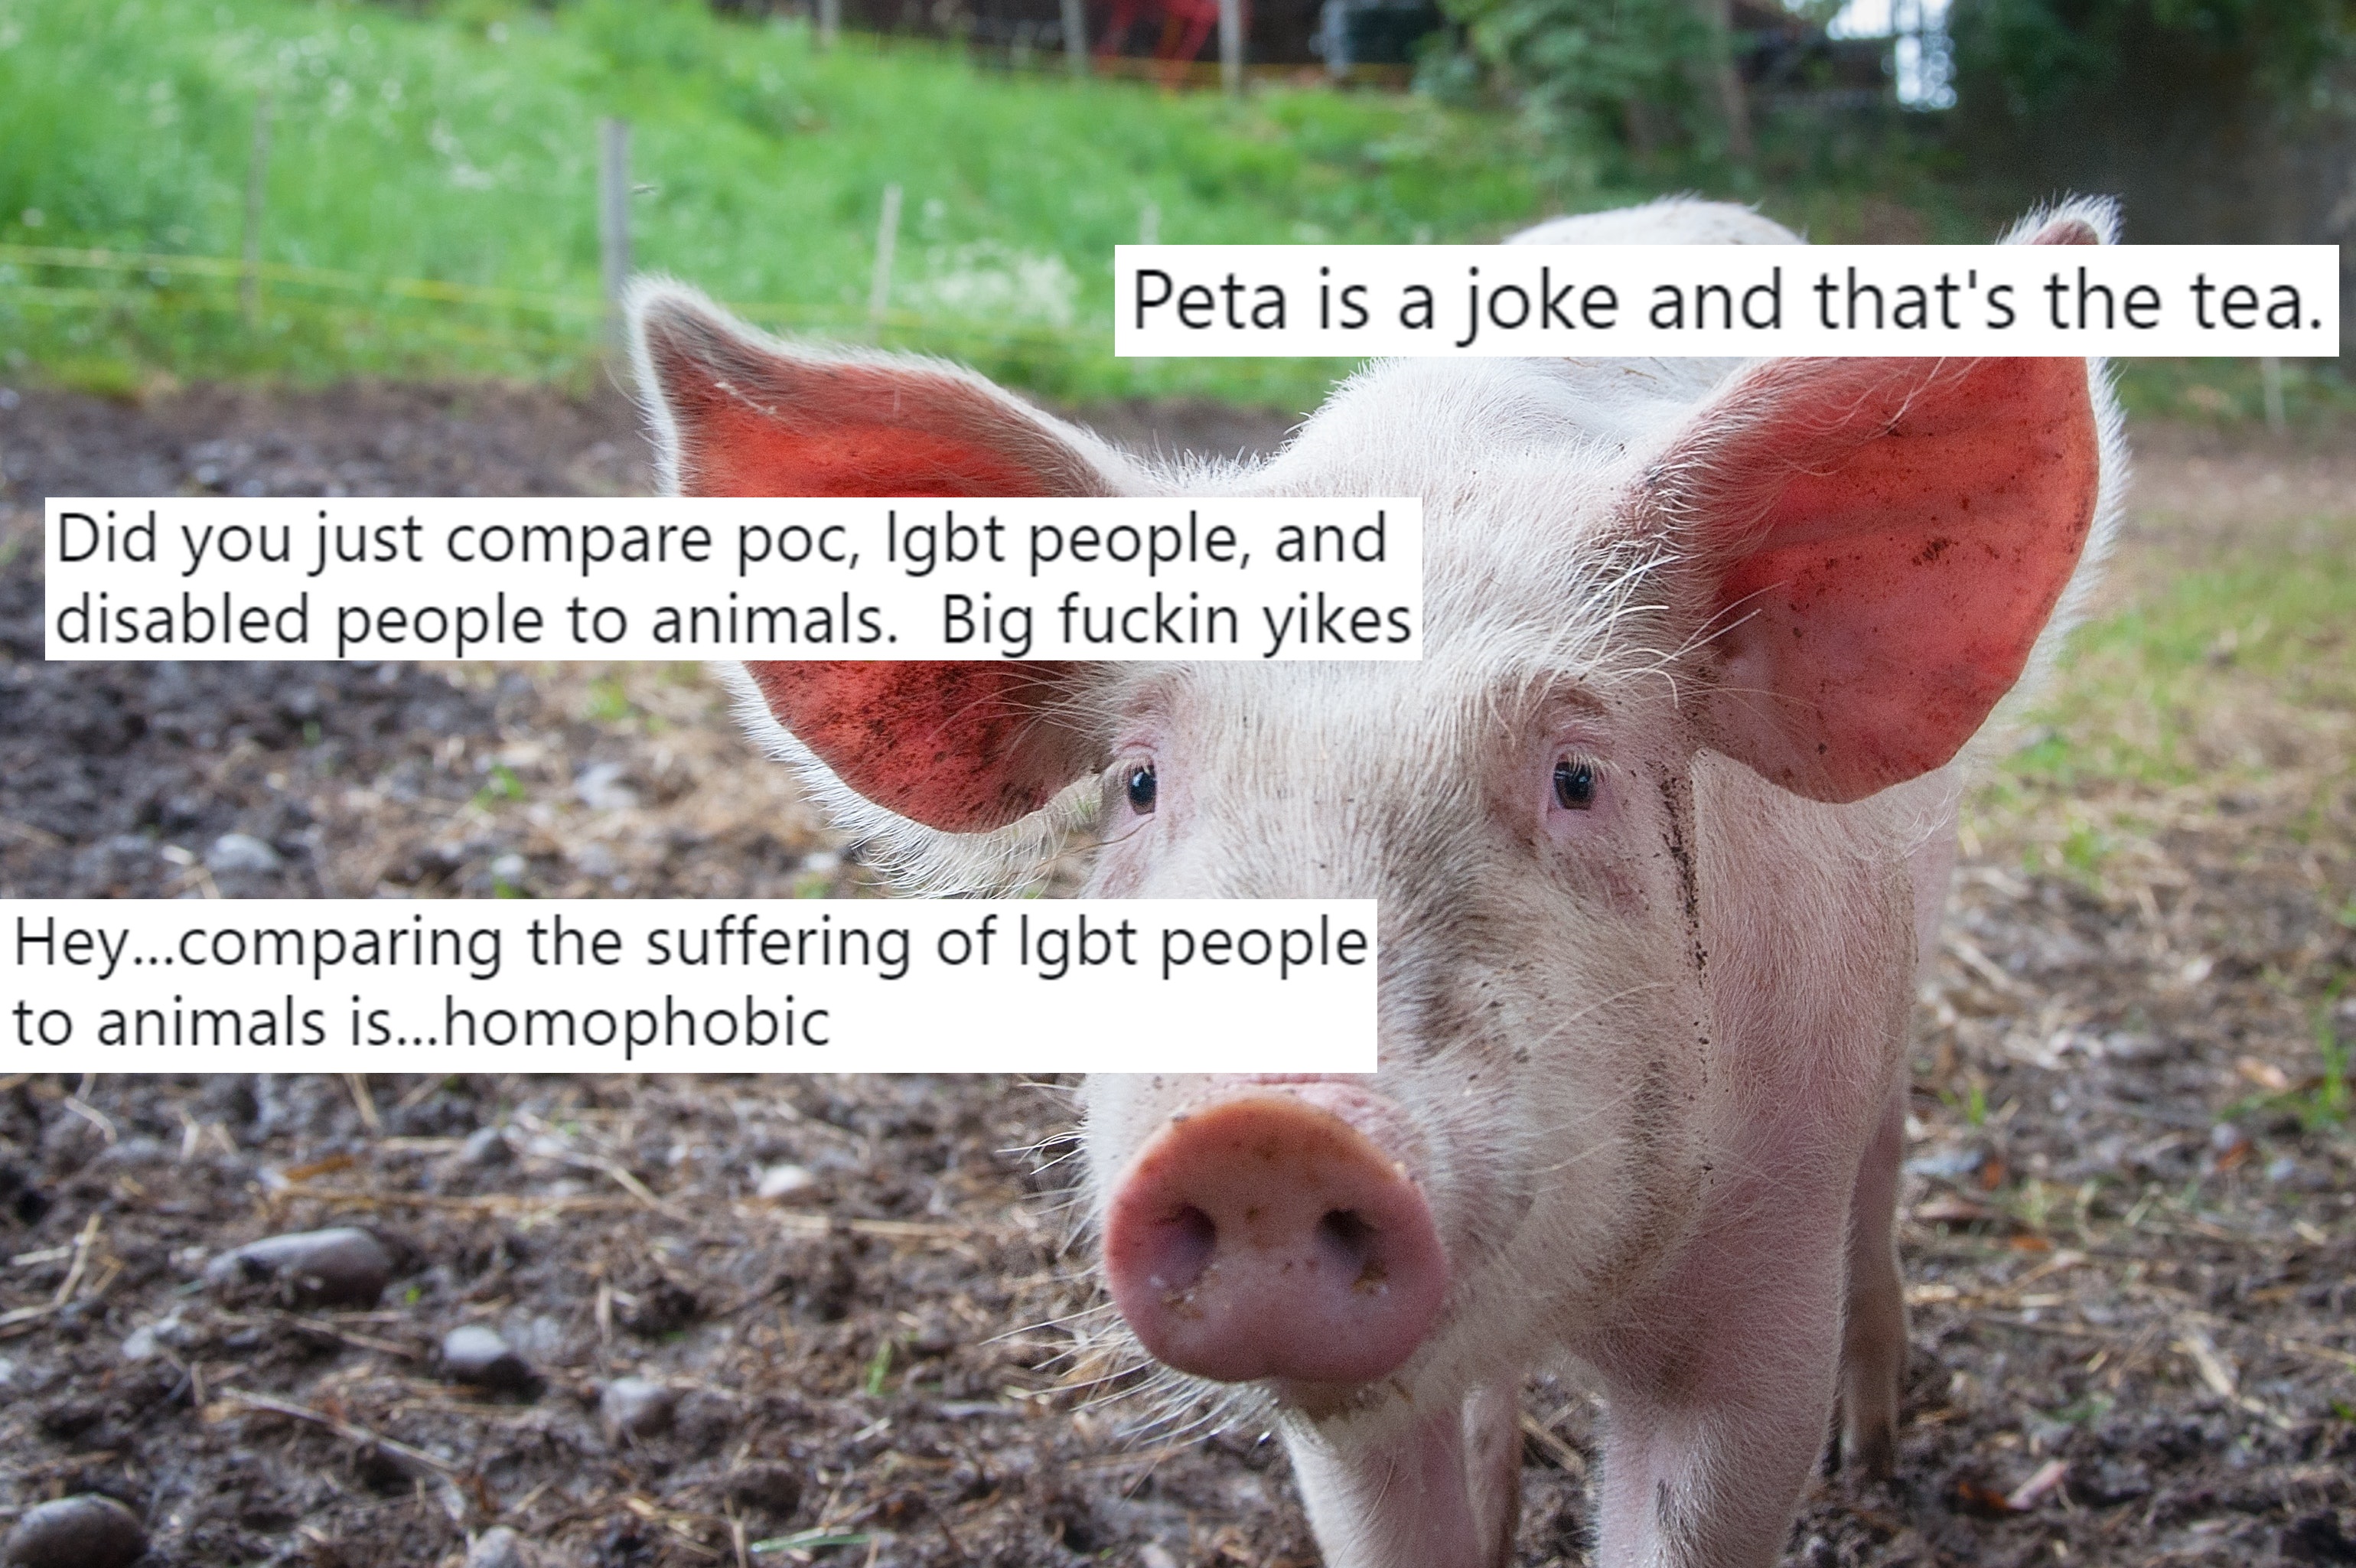 A photo of a pig overlaid with tweets responding to PETA's tweets